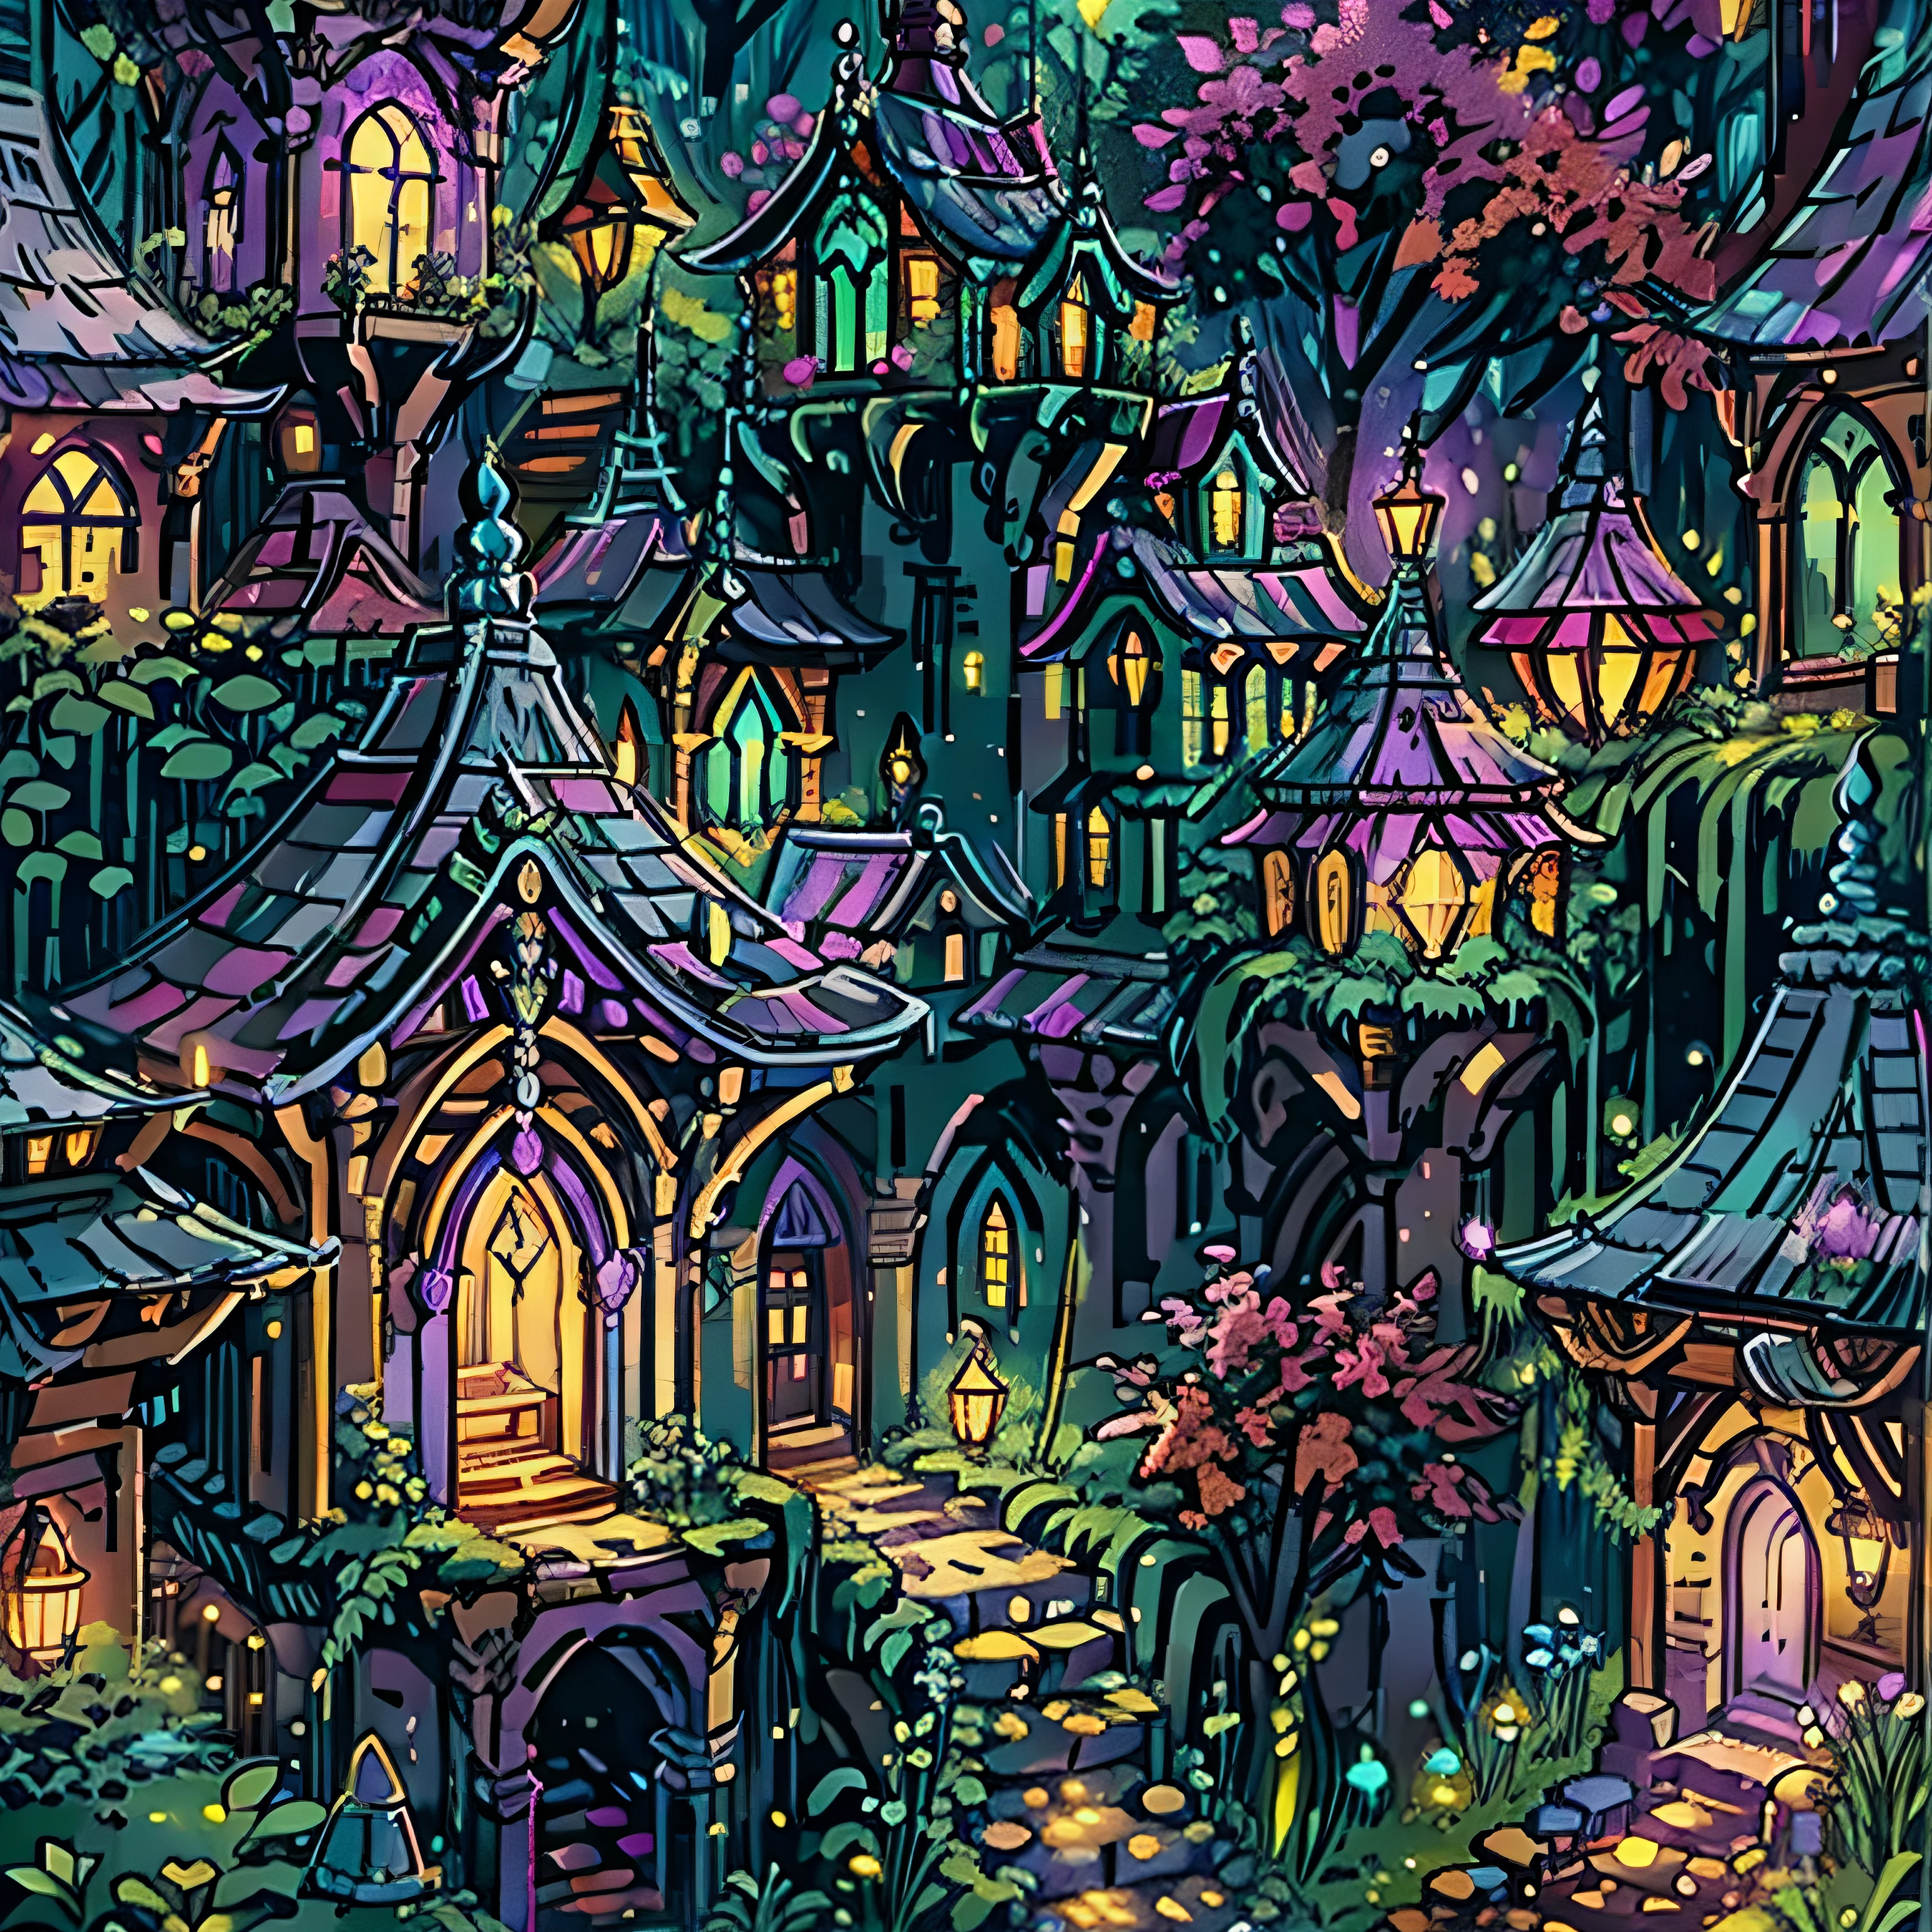 Detail of intricately designed residences in an elvish city nestled within the magical forest, illuminated by a soft, purple glow that exudes enchantment. A tranquil and peaceful place, offering a sense of serenity."